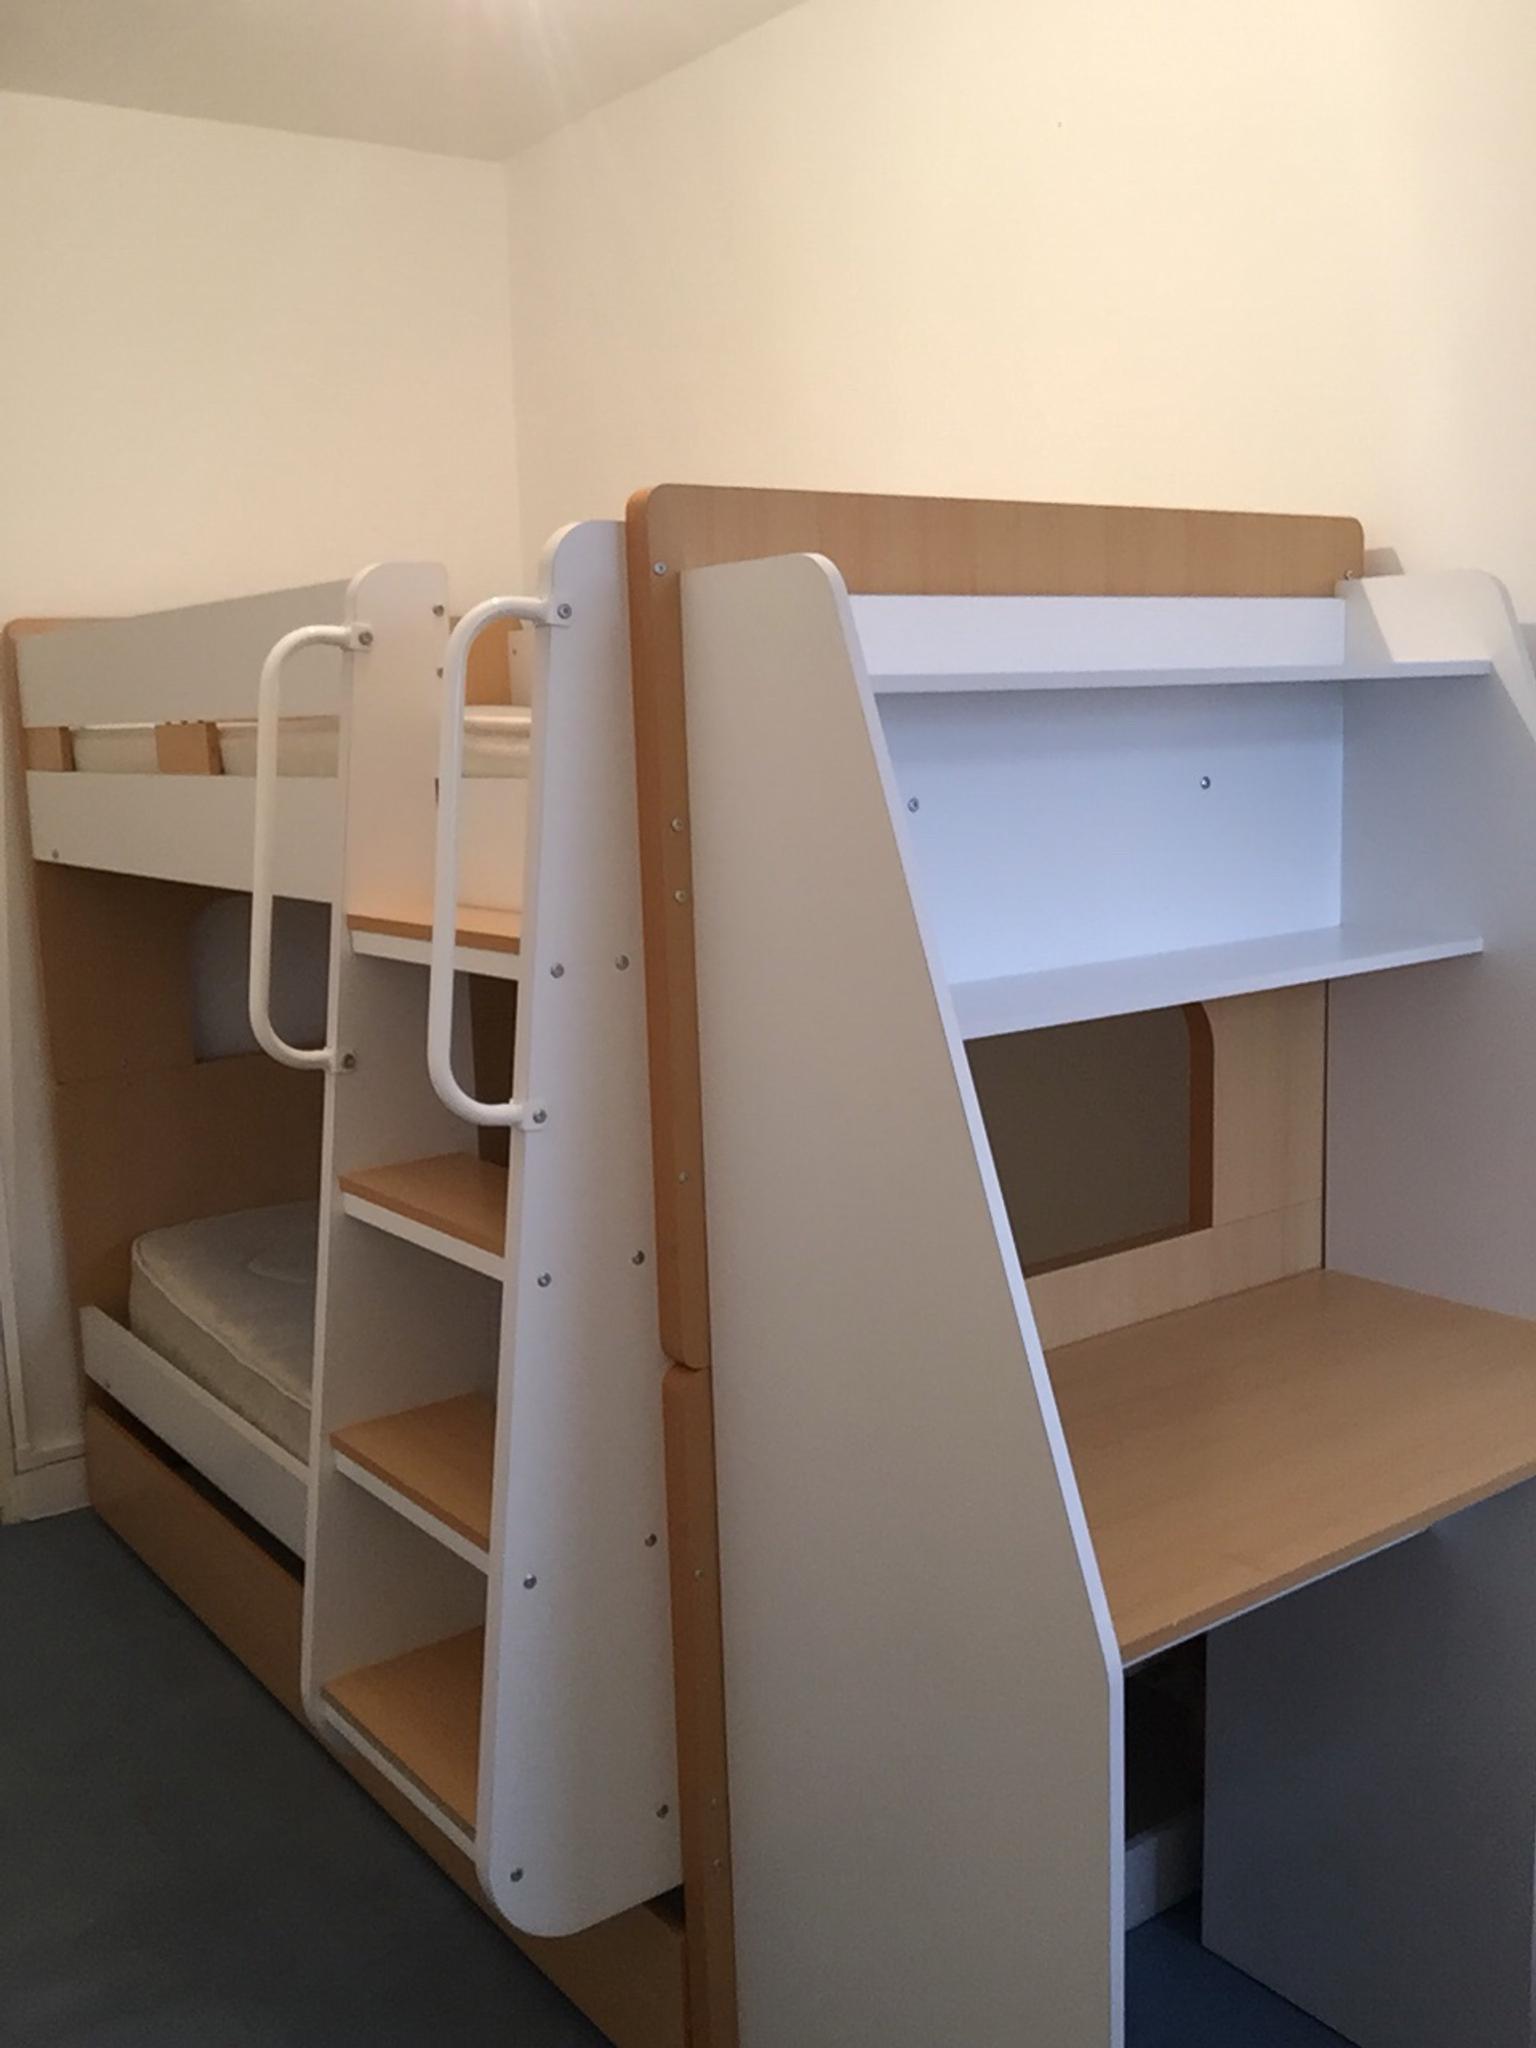 Olympic Bunk Beds With Desk And Guest Bed In E9 London Fur 350 00